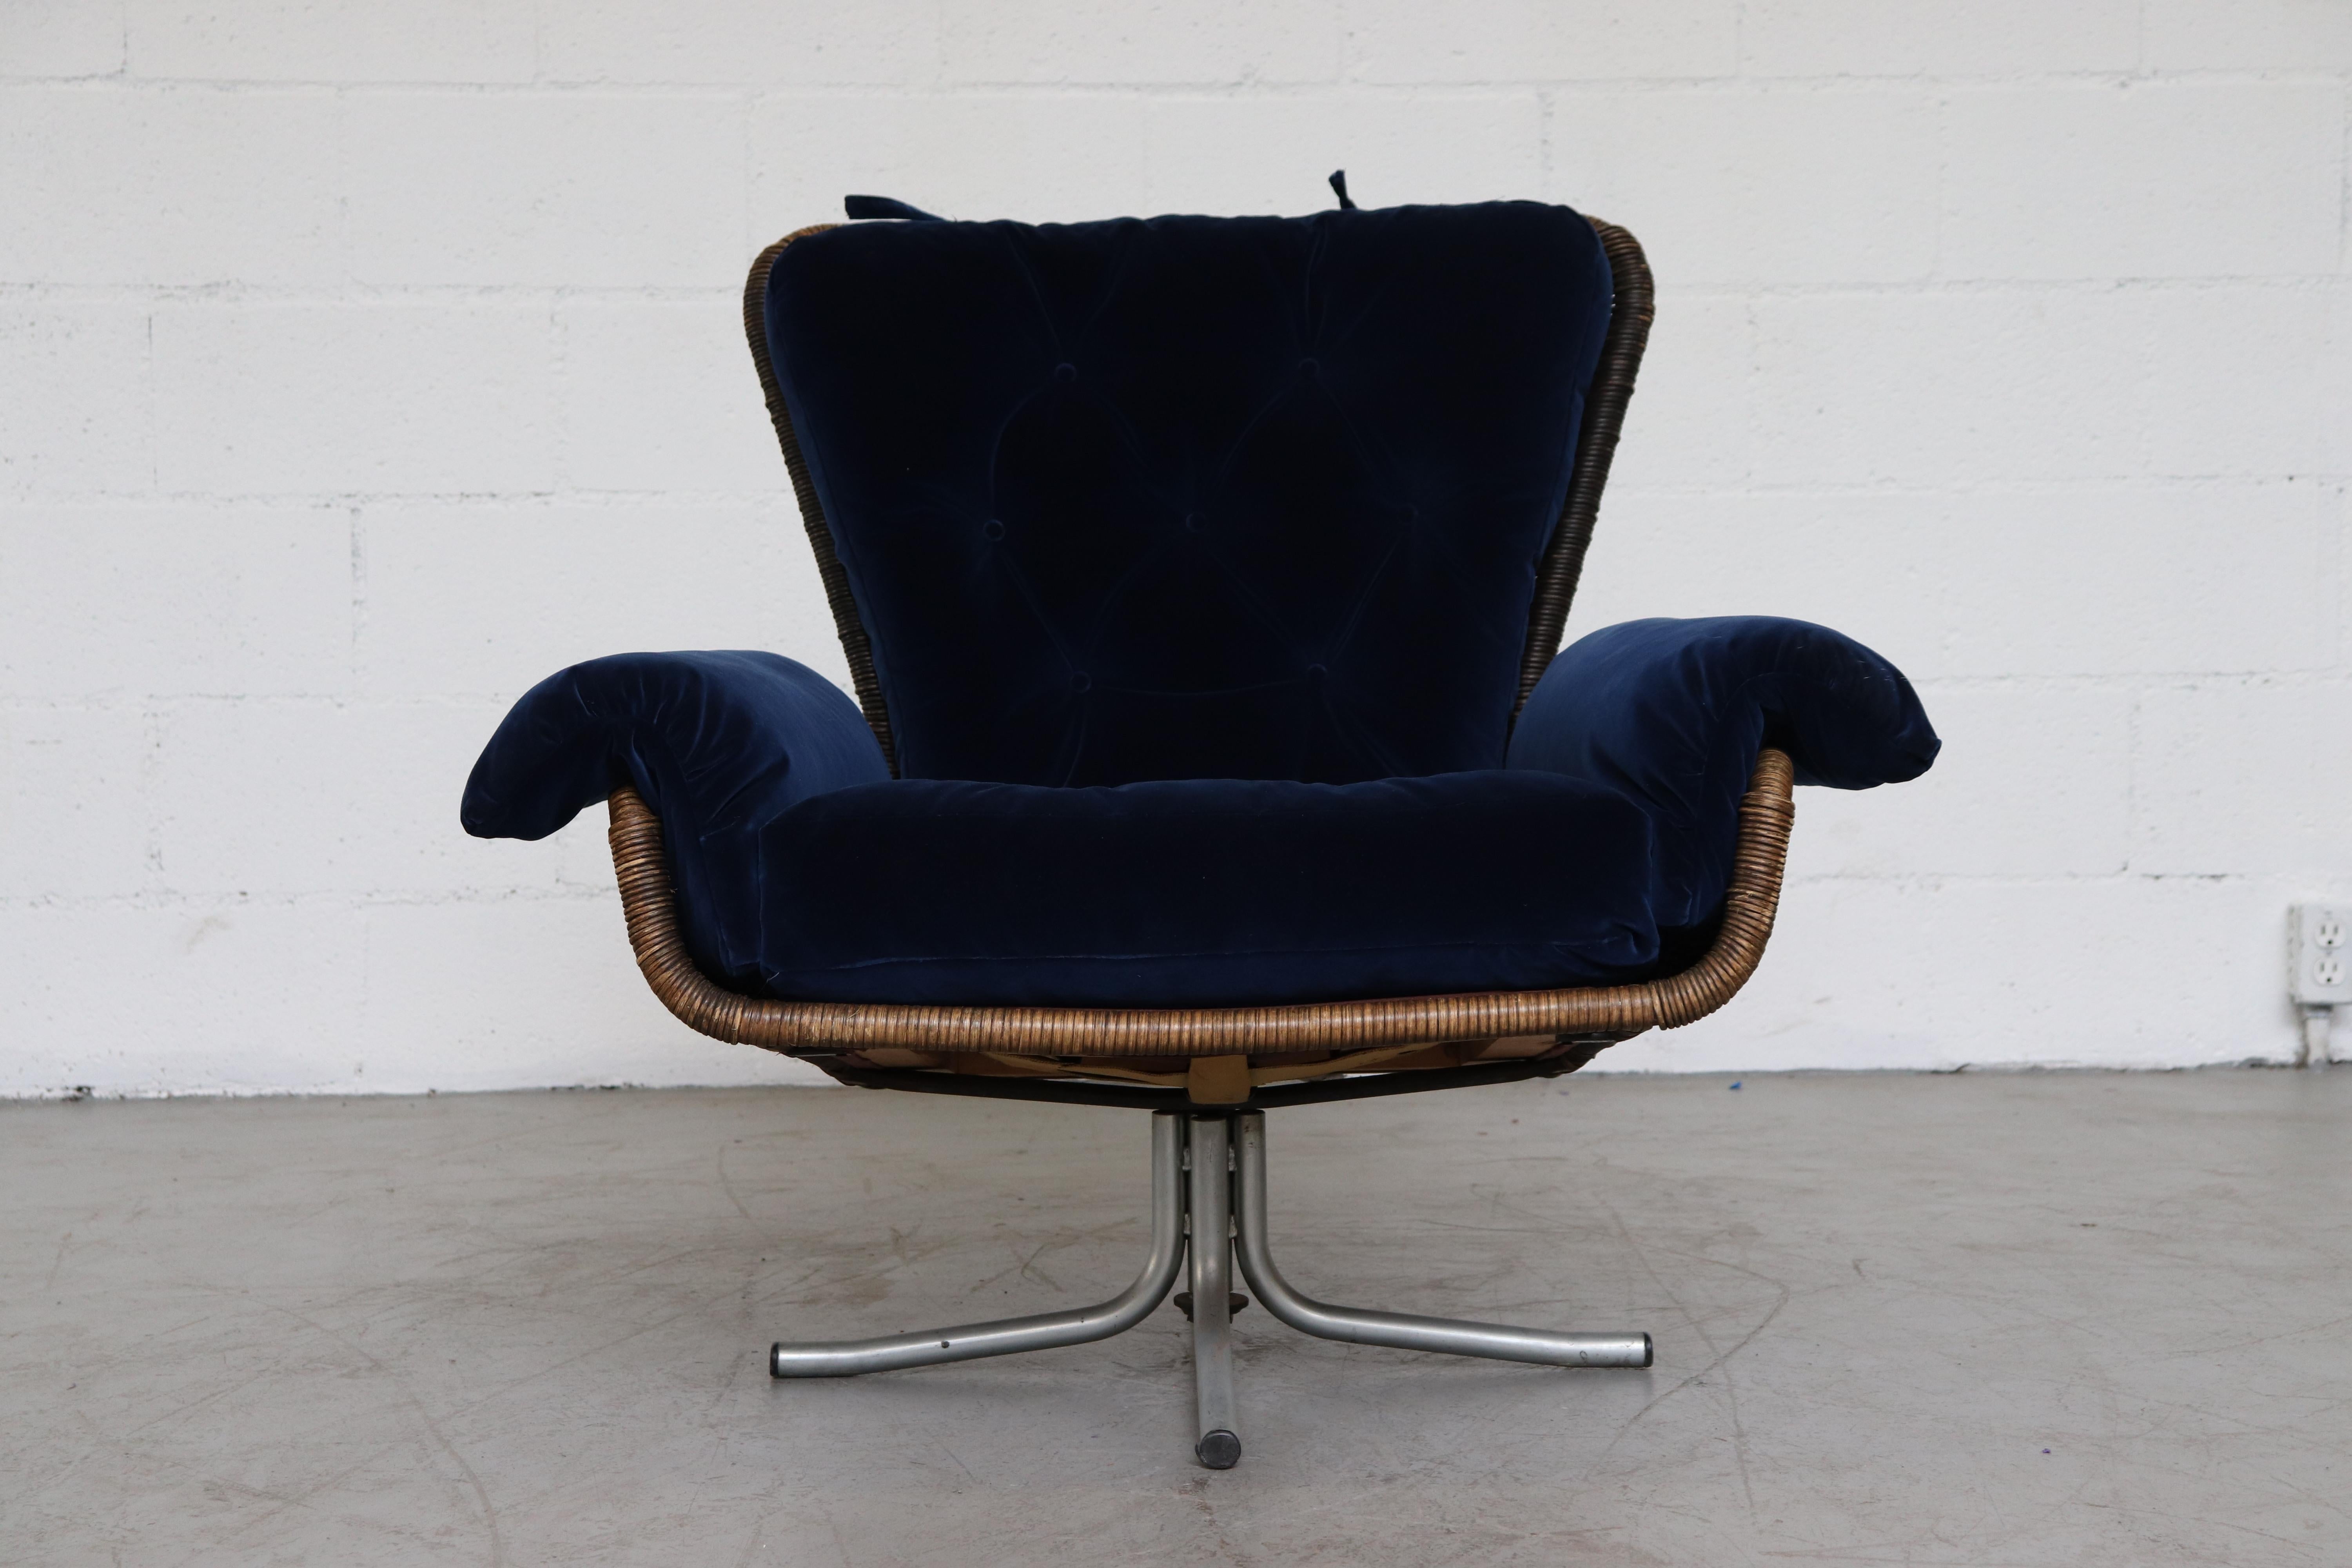 Dramatic high back rattan swivel lounge chair with new cushions in deep royal blue velvet. Woven rattan frame, originally dyed black has faded to a terrific patina. Rattan in original condition with visible signs of wear consistent with its age and